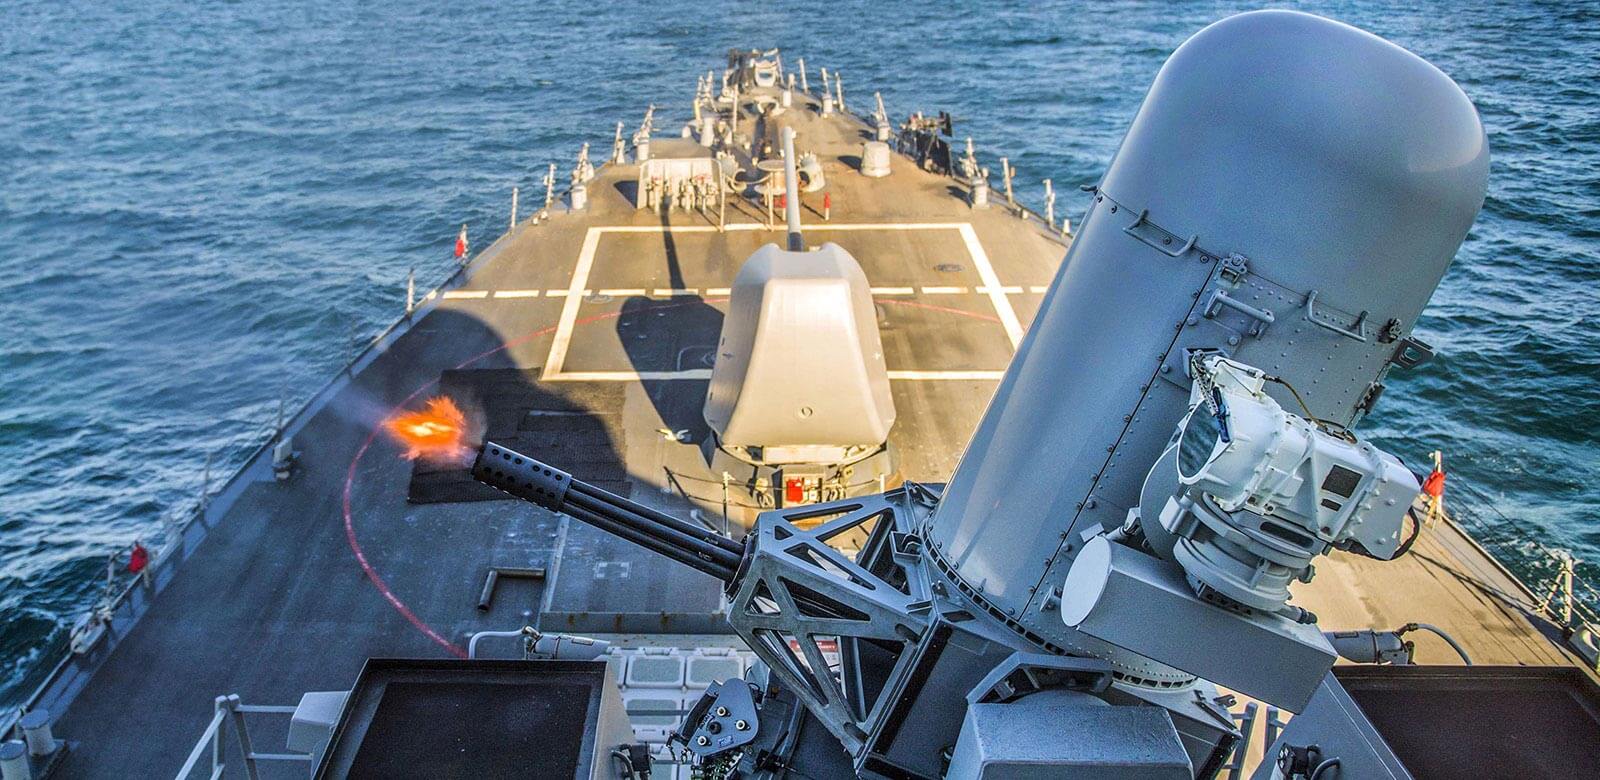 A Plalanx rapid-firing from the deck of a ship